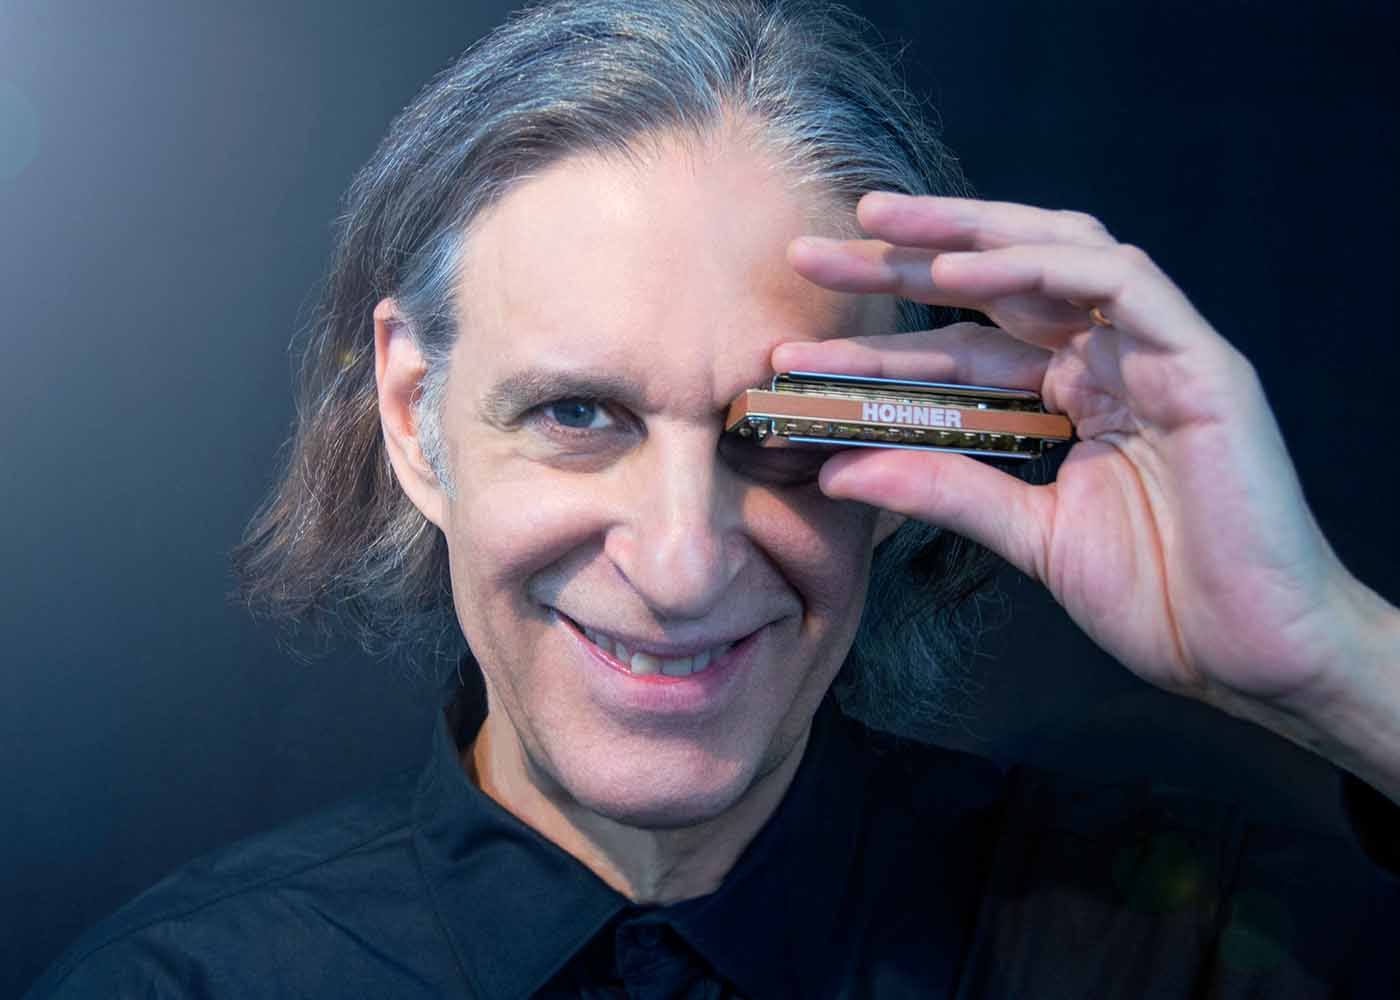 Accomplished musician, composer brings harmonica concerto to ESO; Howard Levy helps launch ESO’s new season this Saturday